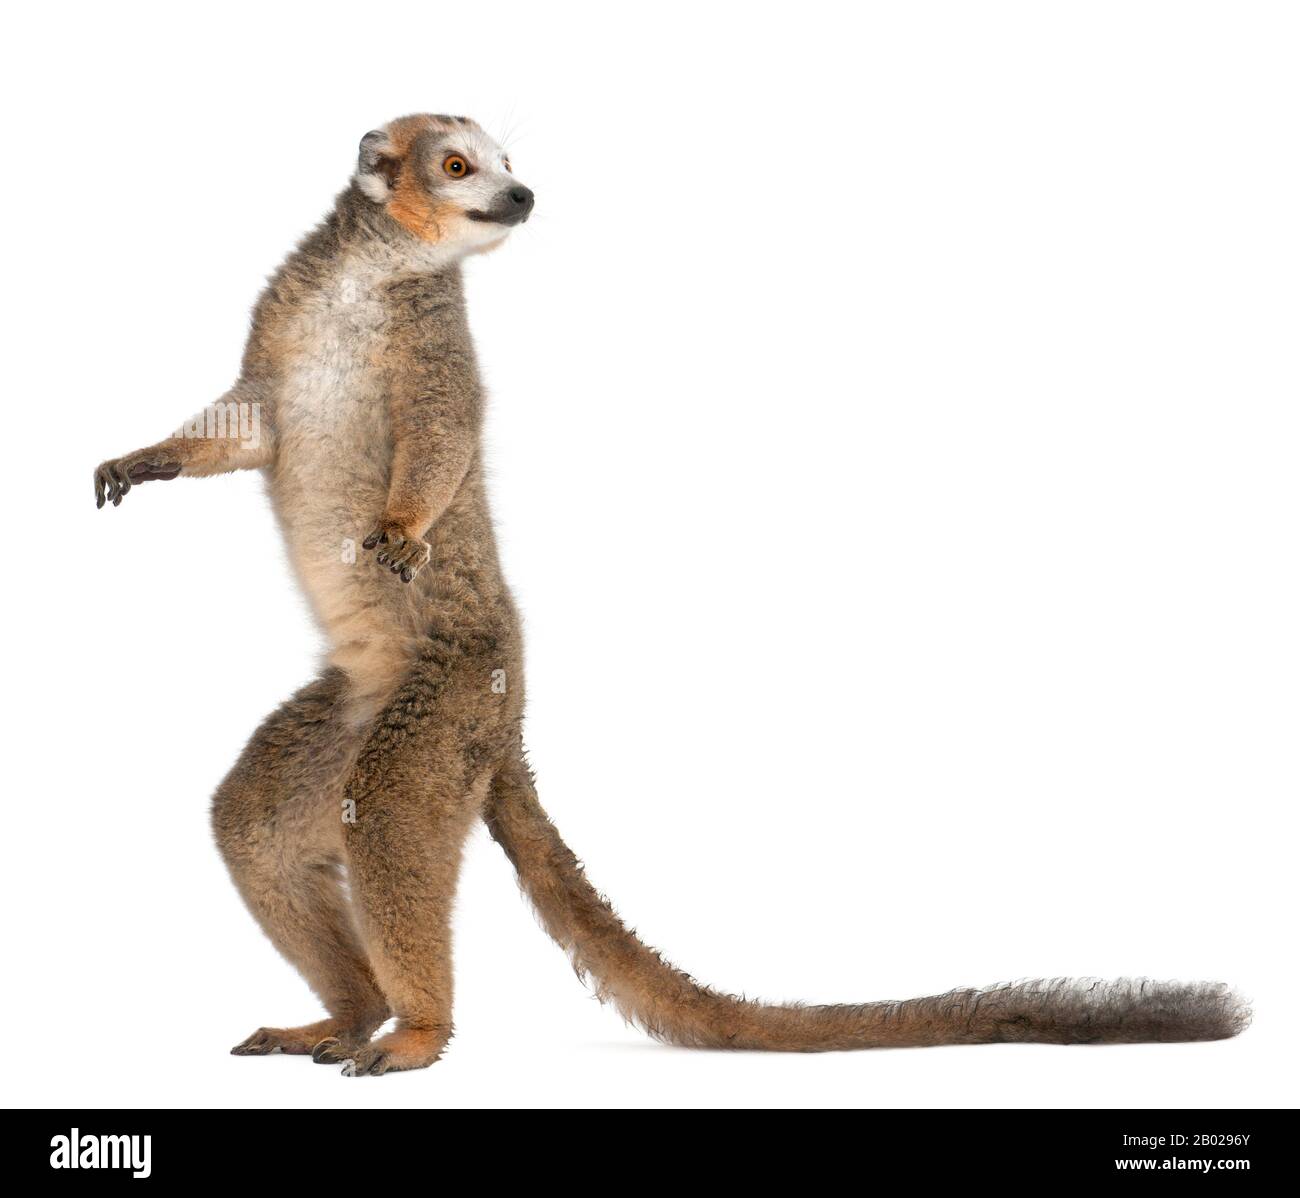 Crowned lemur, Eulemur coronatus, 19 years old, standing in front of white background Stock Photo